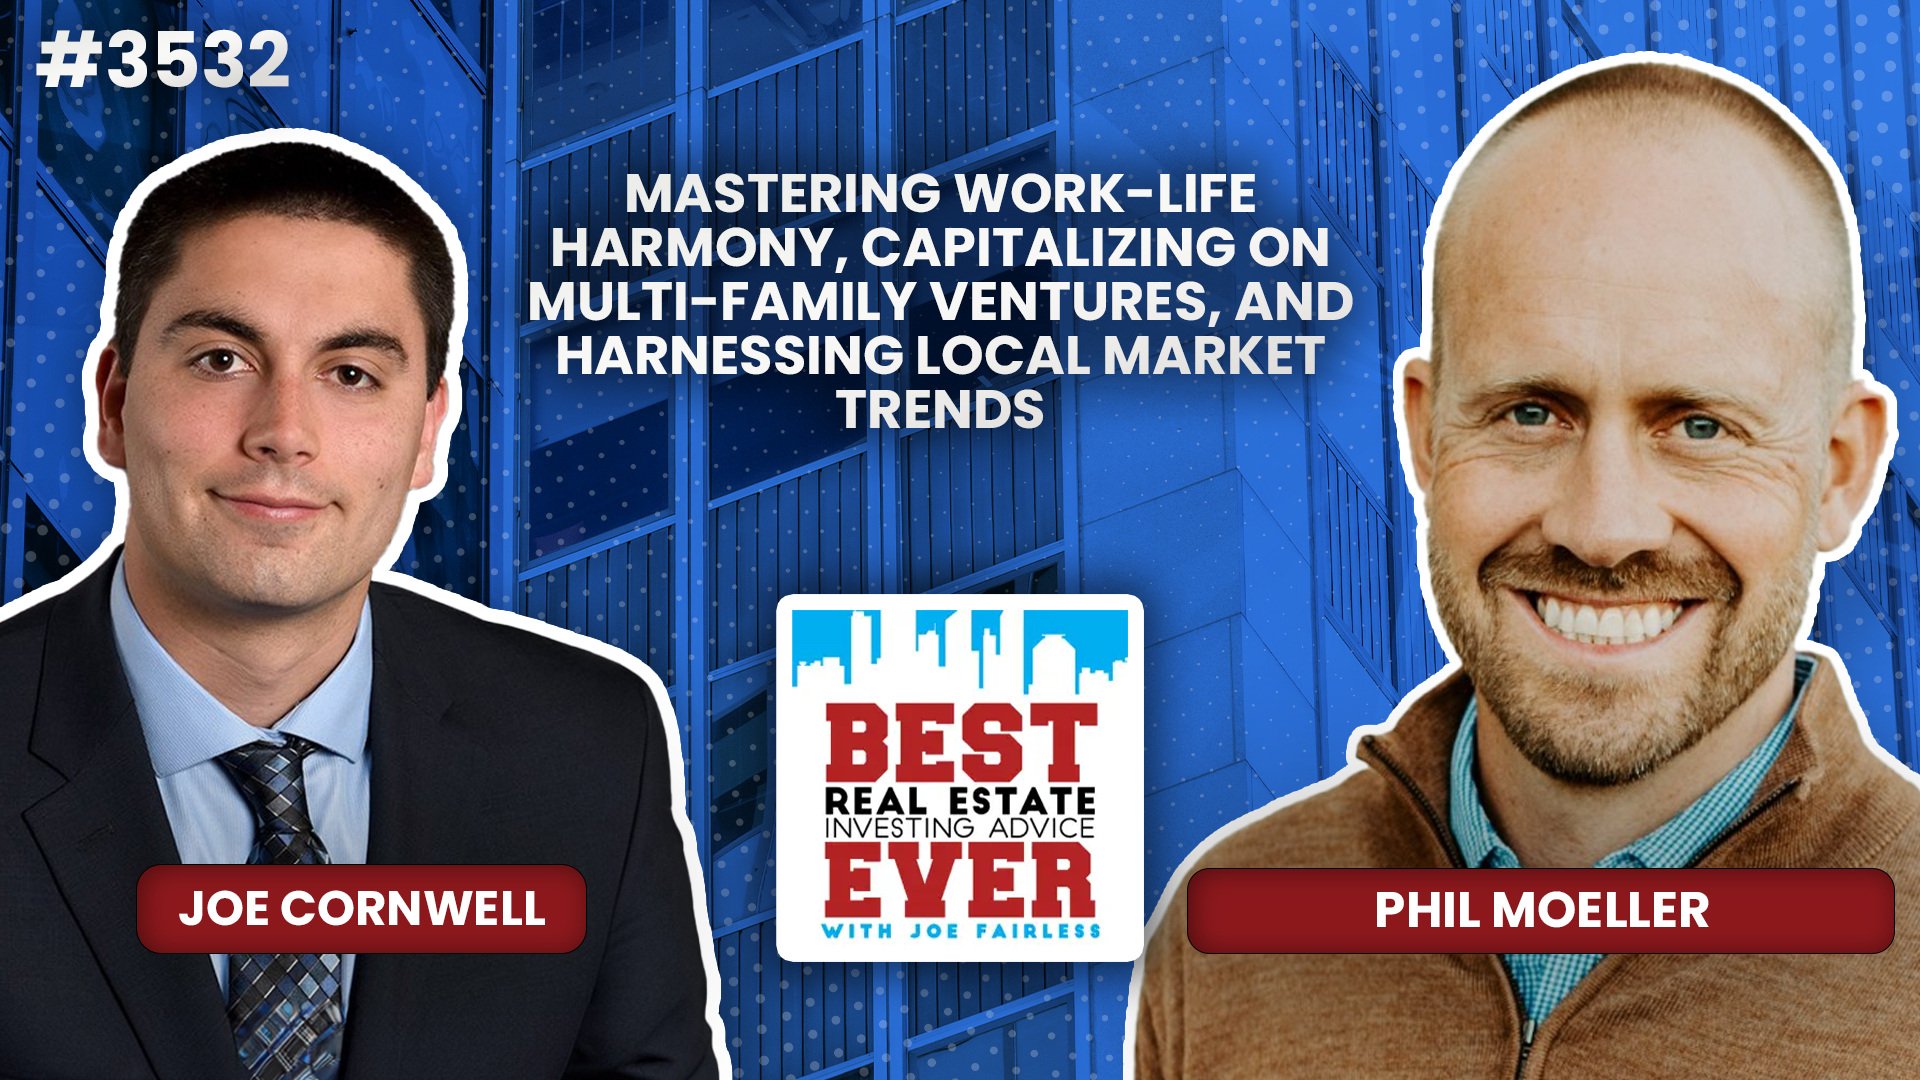 JF3532: Mastering Work-Life Harmony, Capitalizing on Multi-Family Ventures, and Harnessing Local Market Trends ft. Phil Moeller